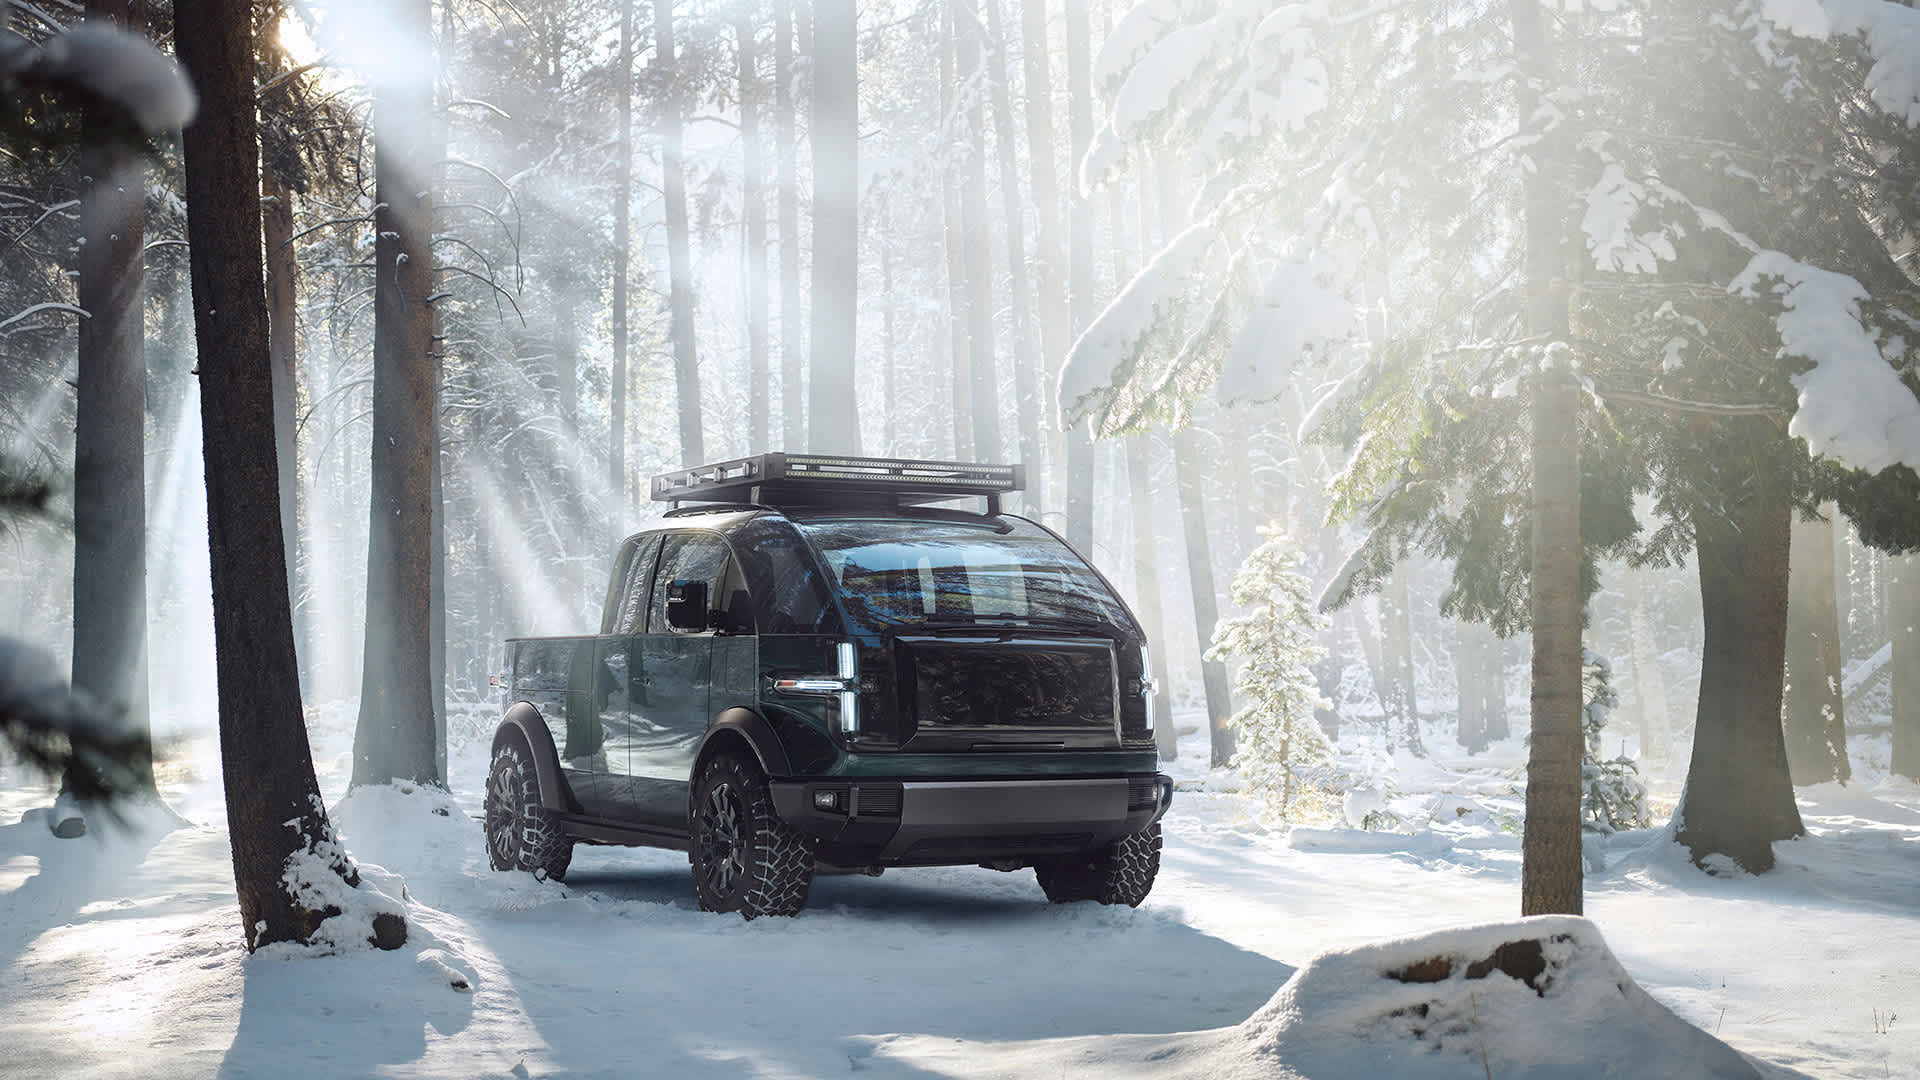 Canoo Pickup Truck in the snowy forest